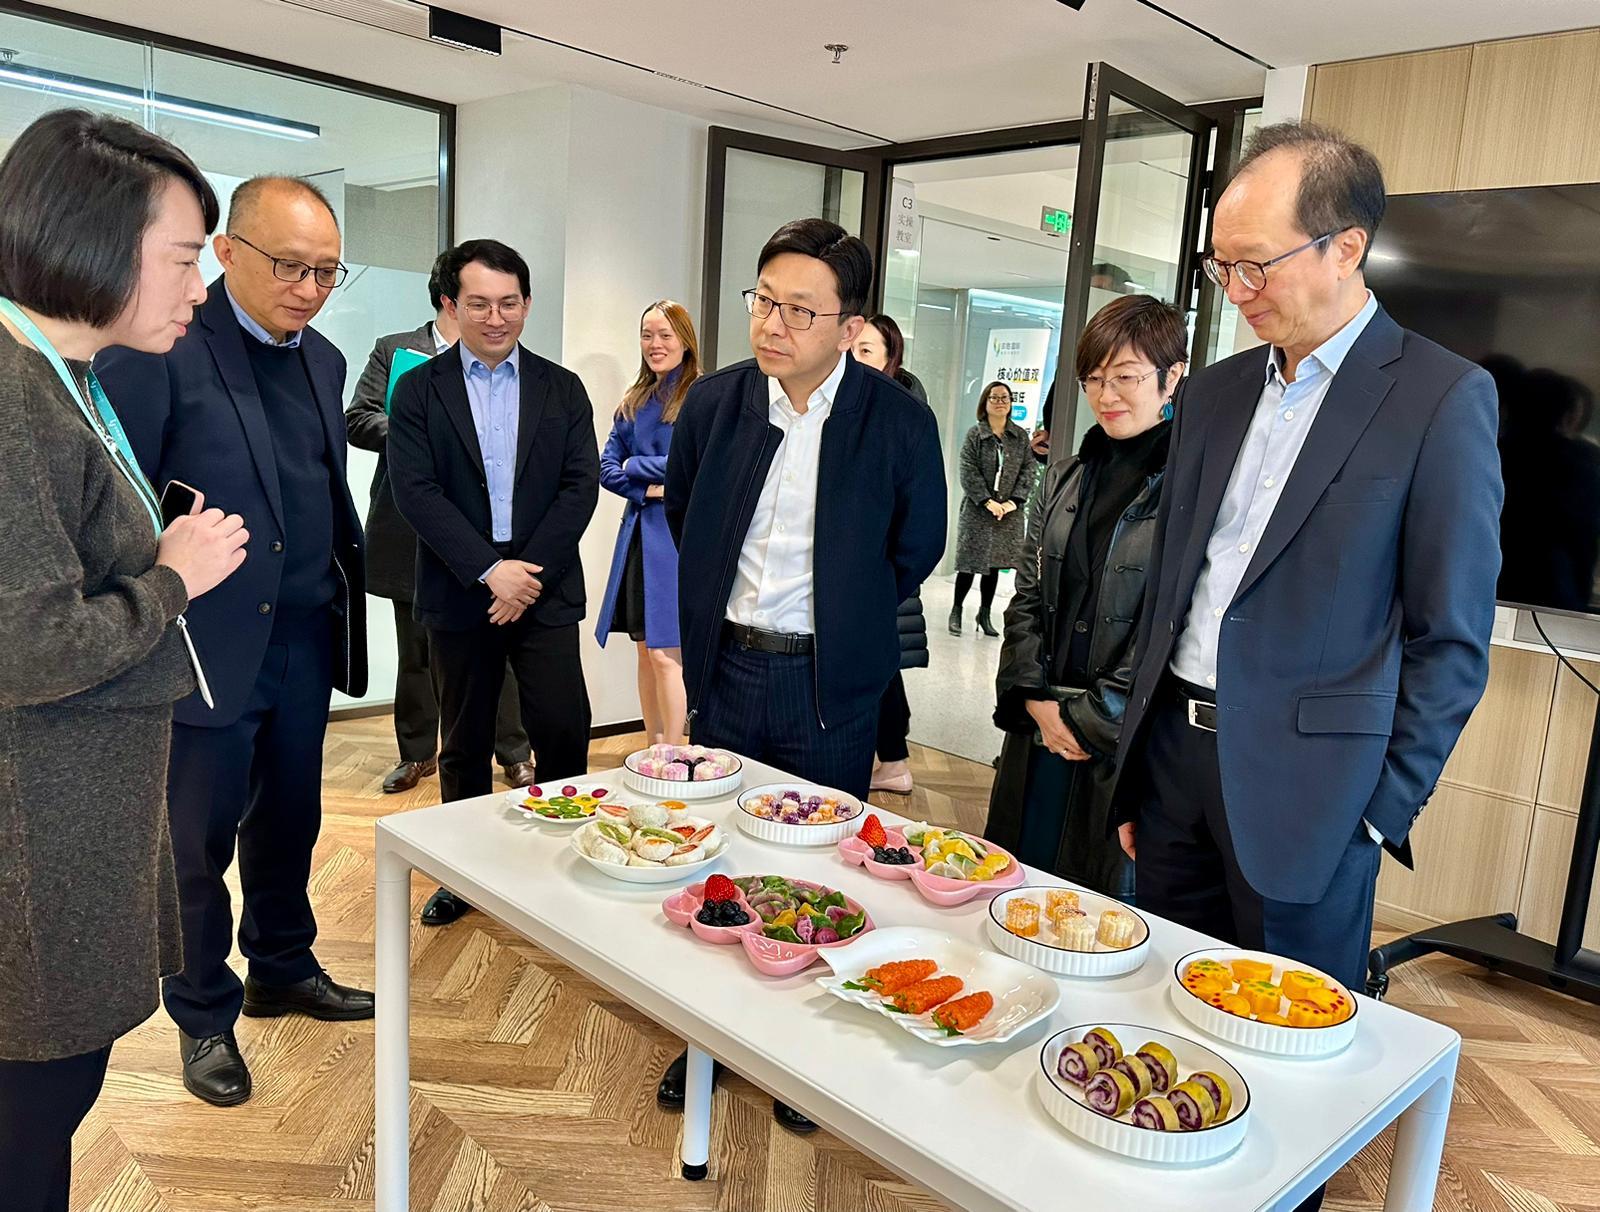 The Secretary for Labour and Welfare, Mr Chris Sun, today (January 14) concluded his visit to Shanghai. Photo shows Mr Sun (front row, third right) learning about foods prepared by babycare trainees in his visit to a training school yesterday afternoon (January 13).